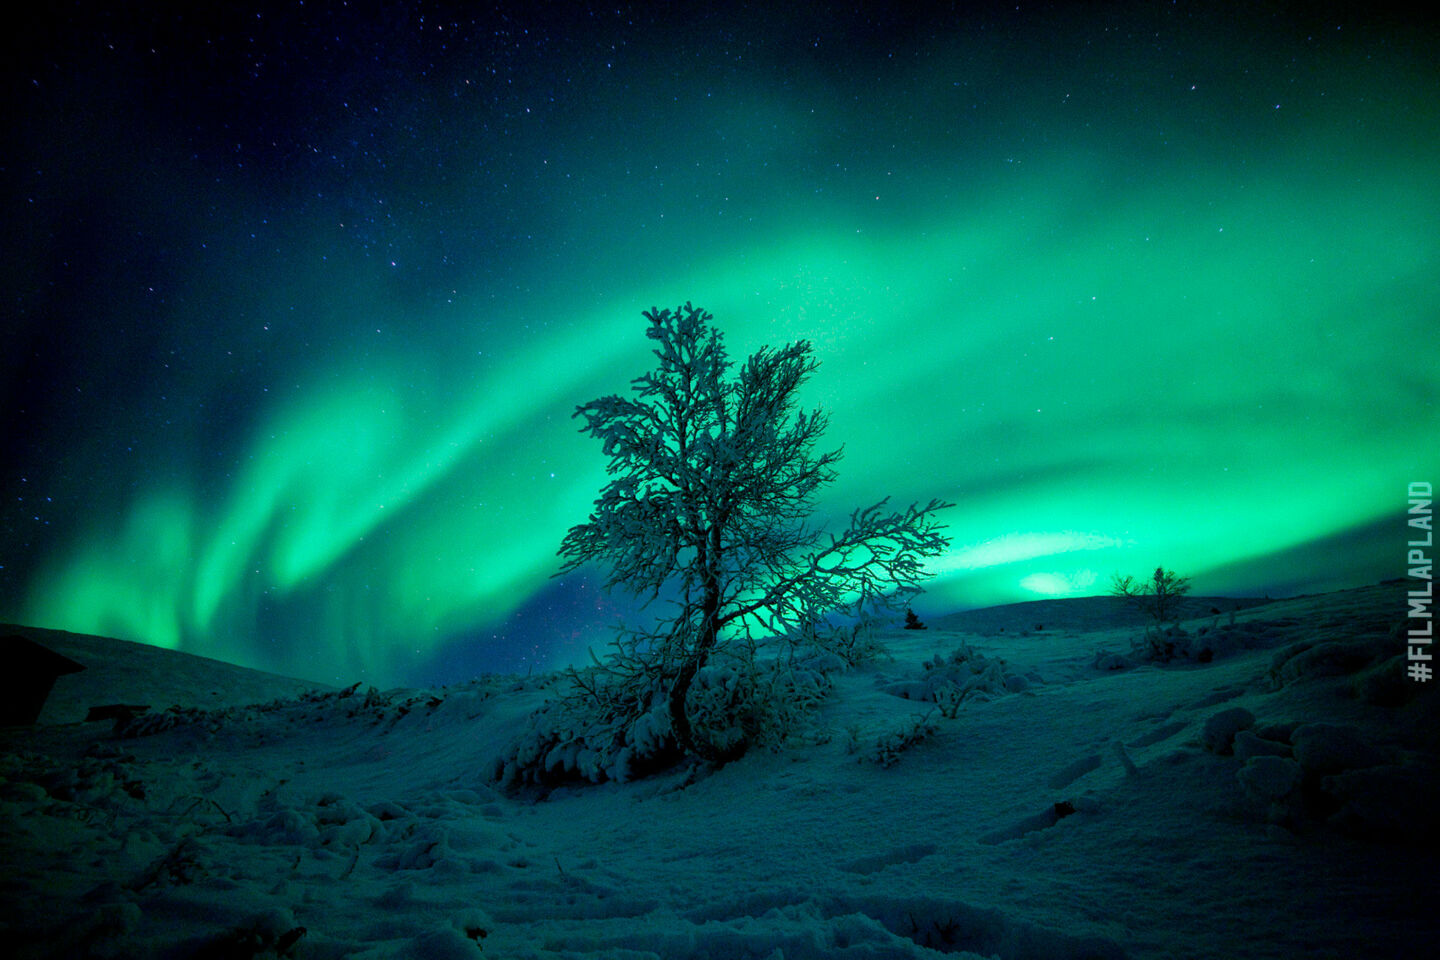 Northern Lights over a snowy forest, a Finnish Lapland filming location feature